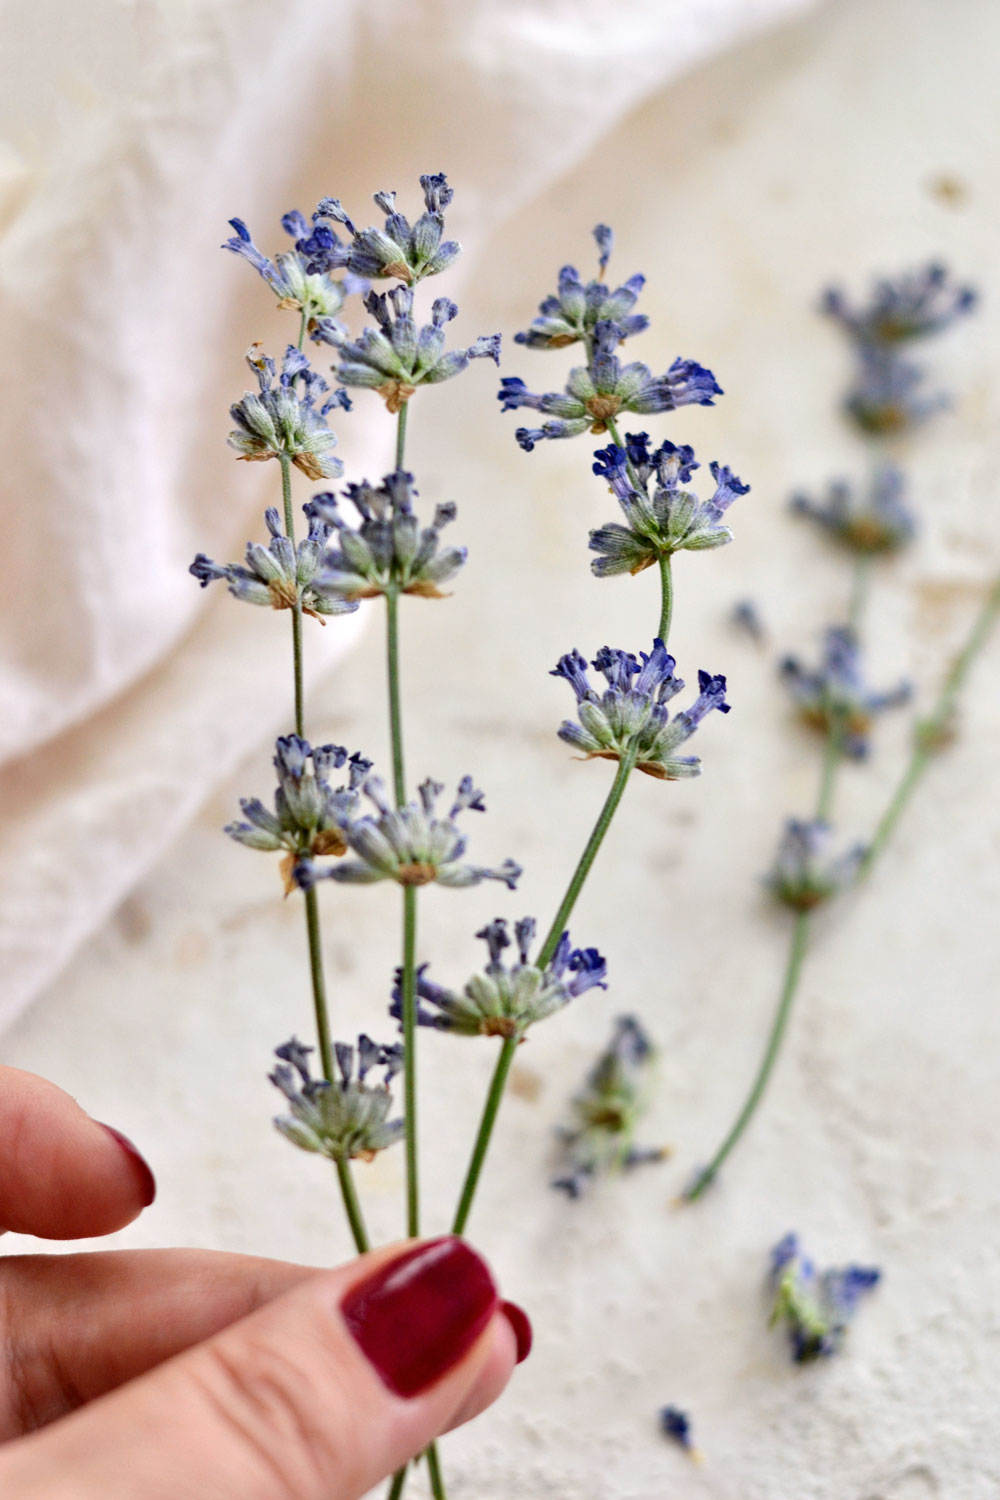 Learn how to easily press lavender flowers in only 10 seconds!